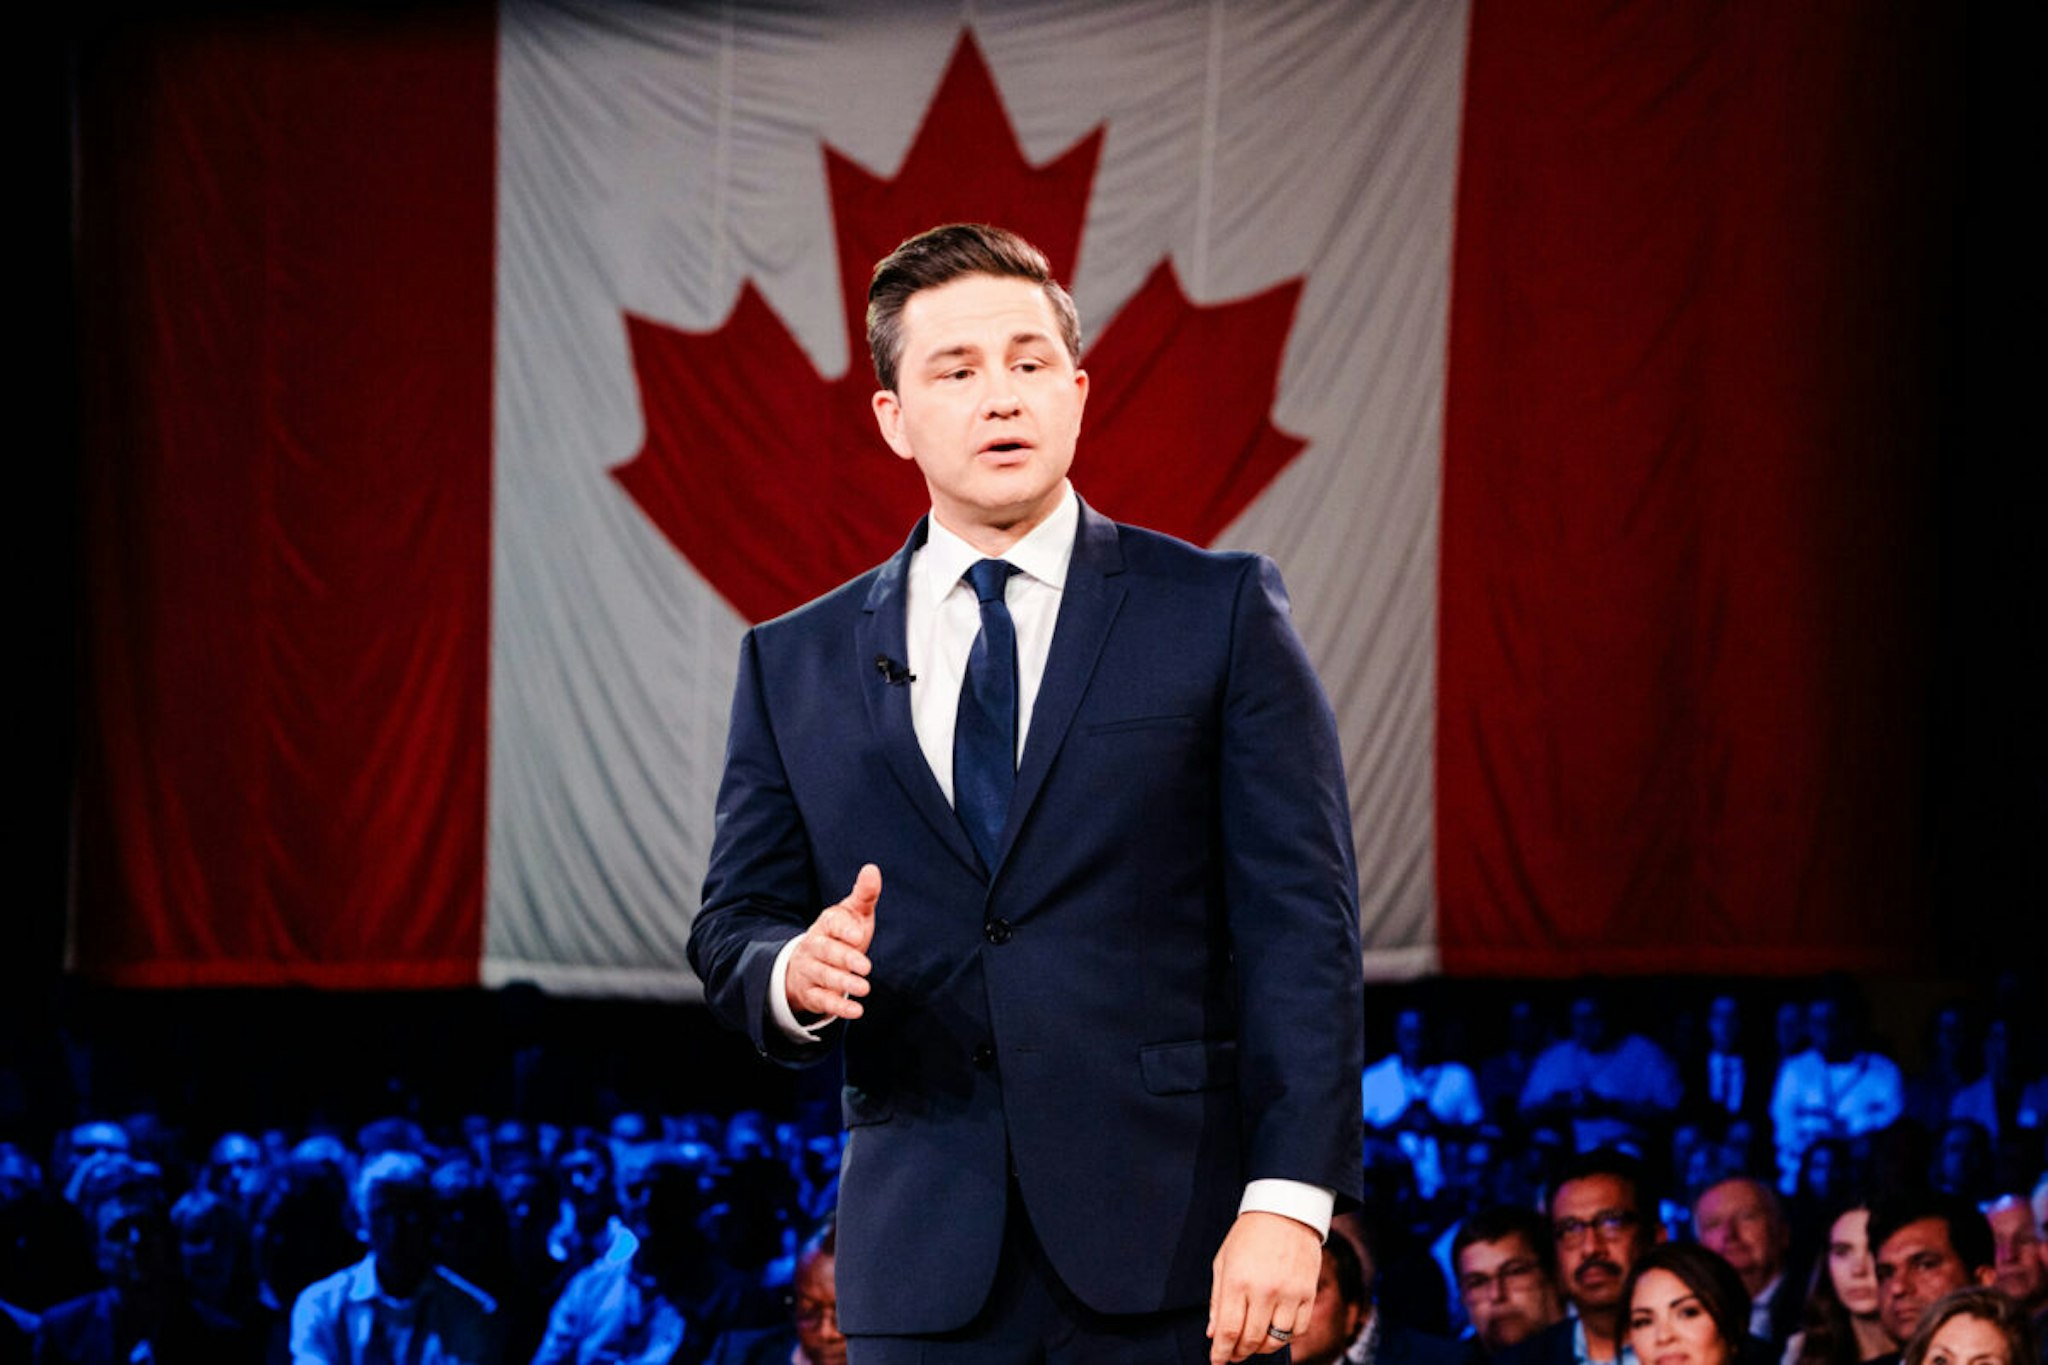 Pierre Poilievre, leader of Canada's Conservative Party, speaks during the Conservative Convention in Quebec City, Quebec, Canada, on Friday, Sept. 8, 2023. Polling firm Abacus Data recently showed Pierre Poilievre's Conservatives 10 points ahead of the Liberals.